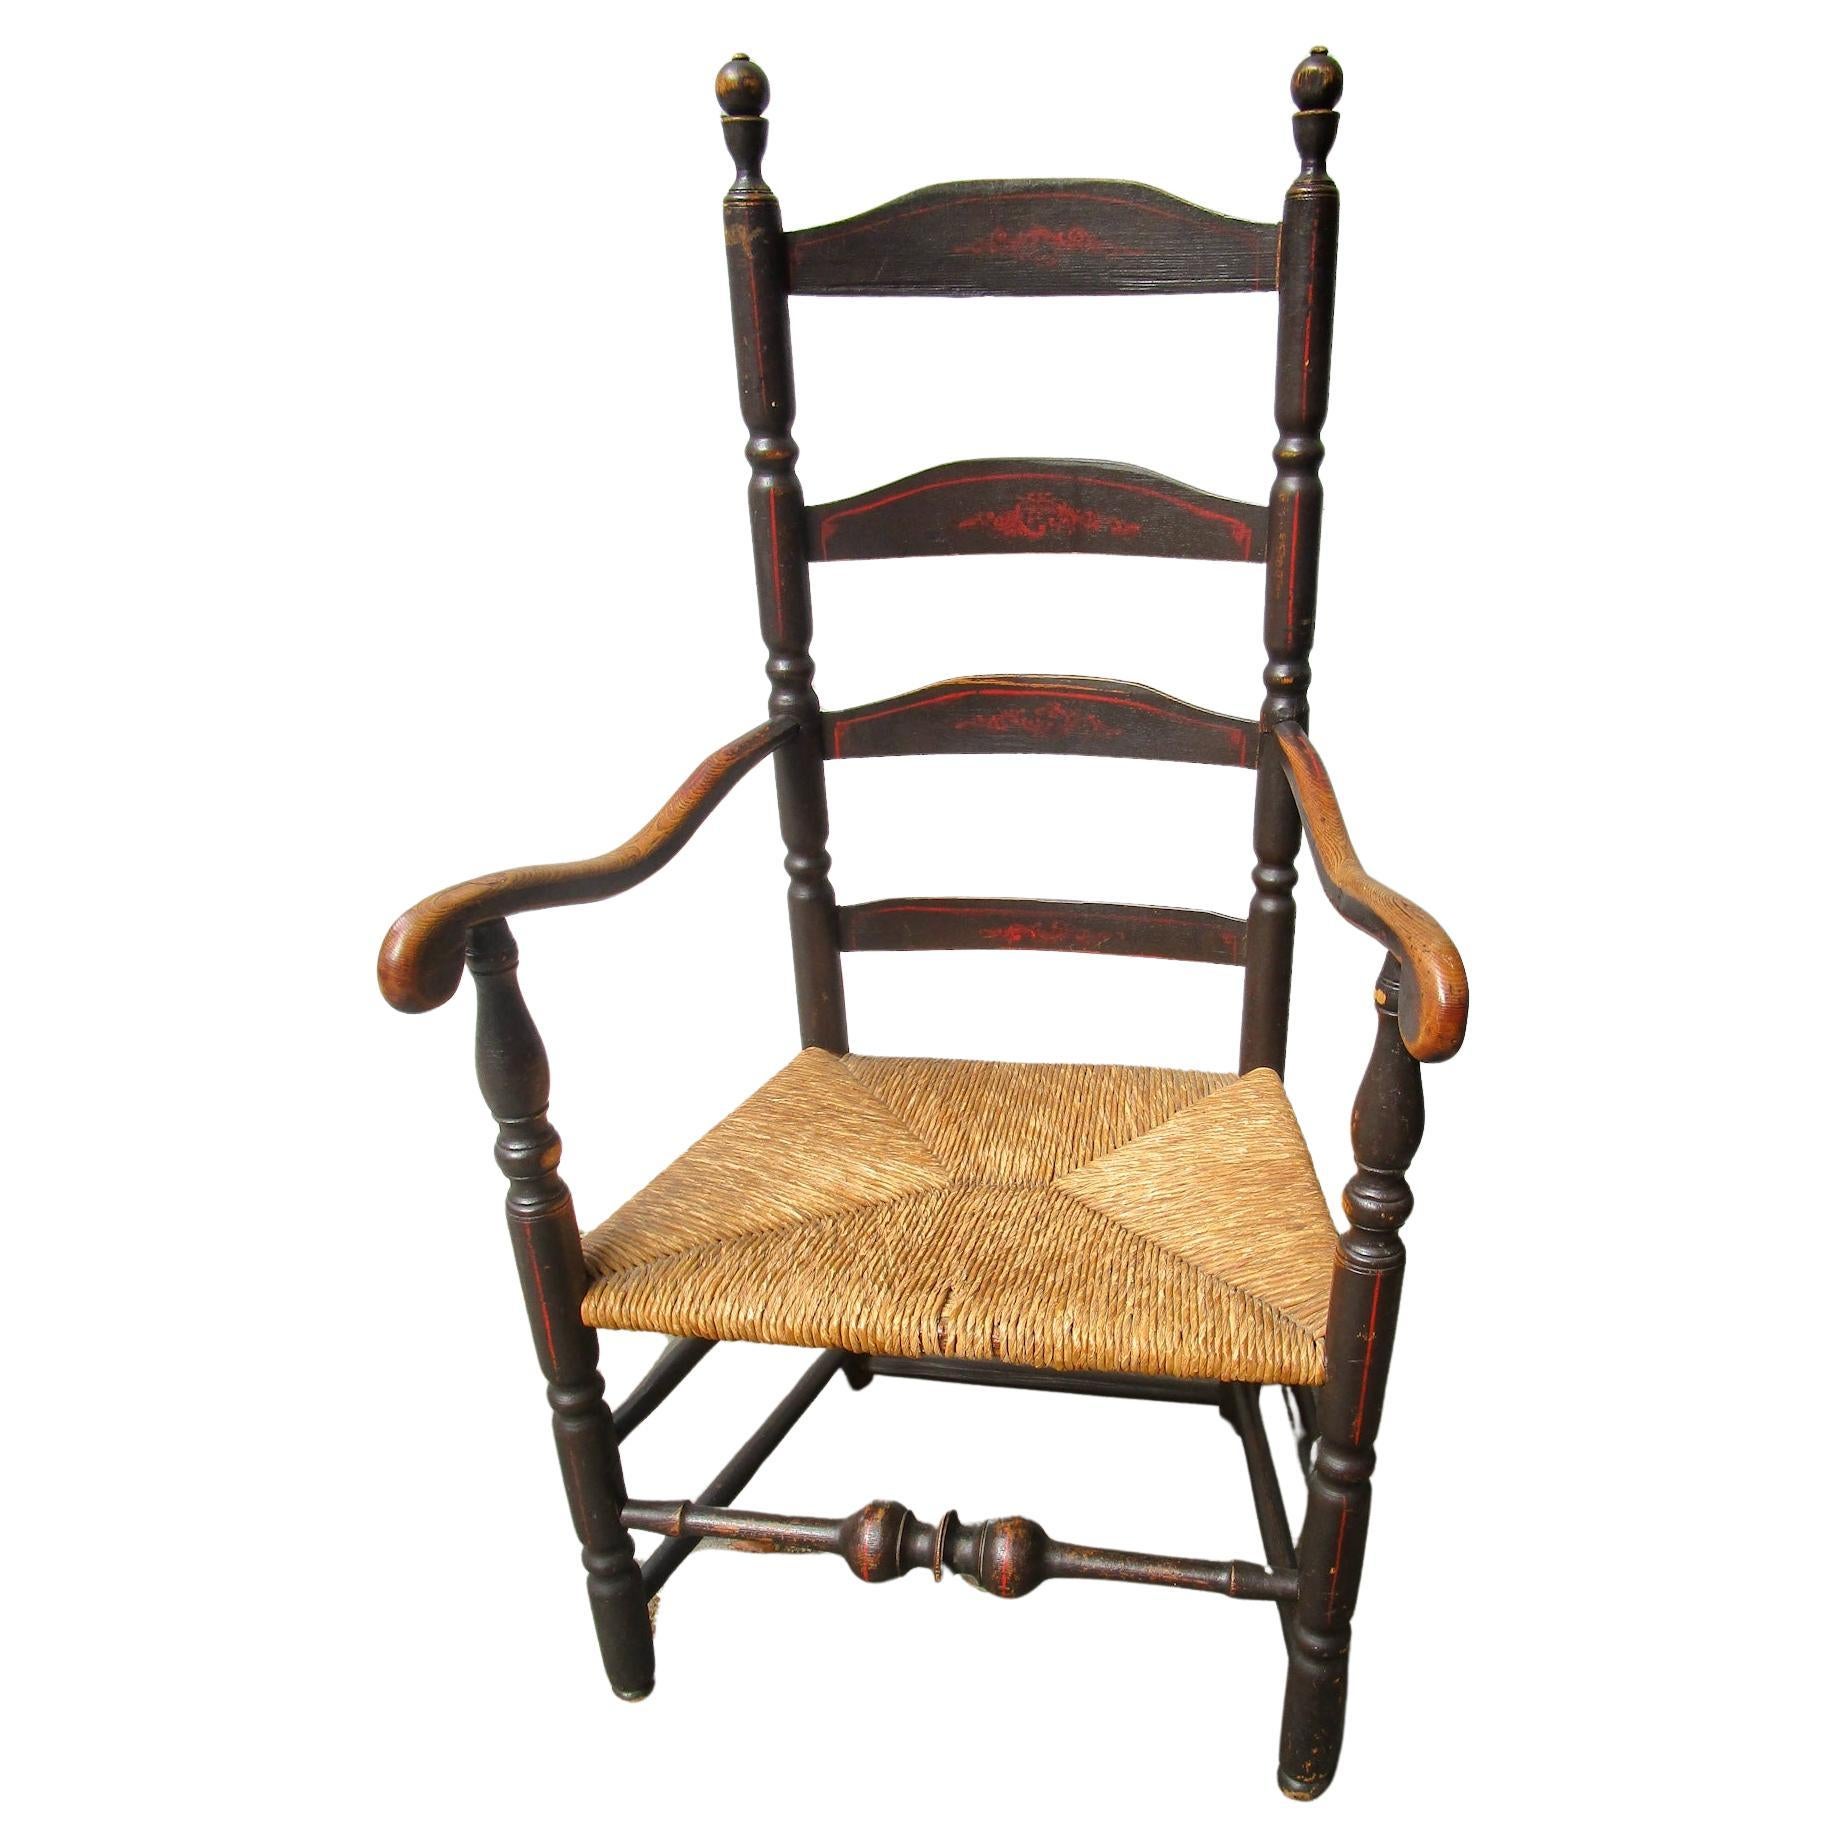 18thc American Stenciled Ladderback Chair with Rush Seat and Original Finish For Sale